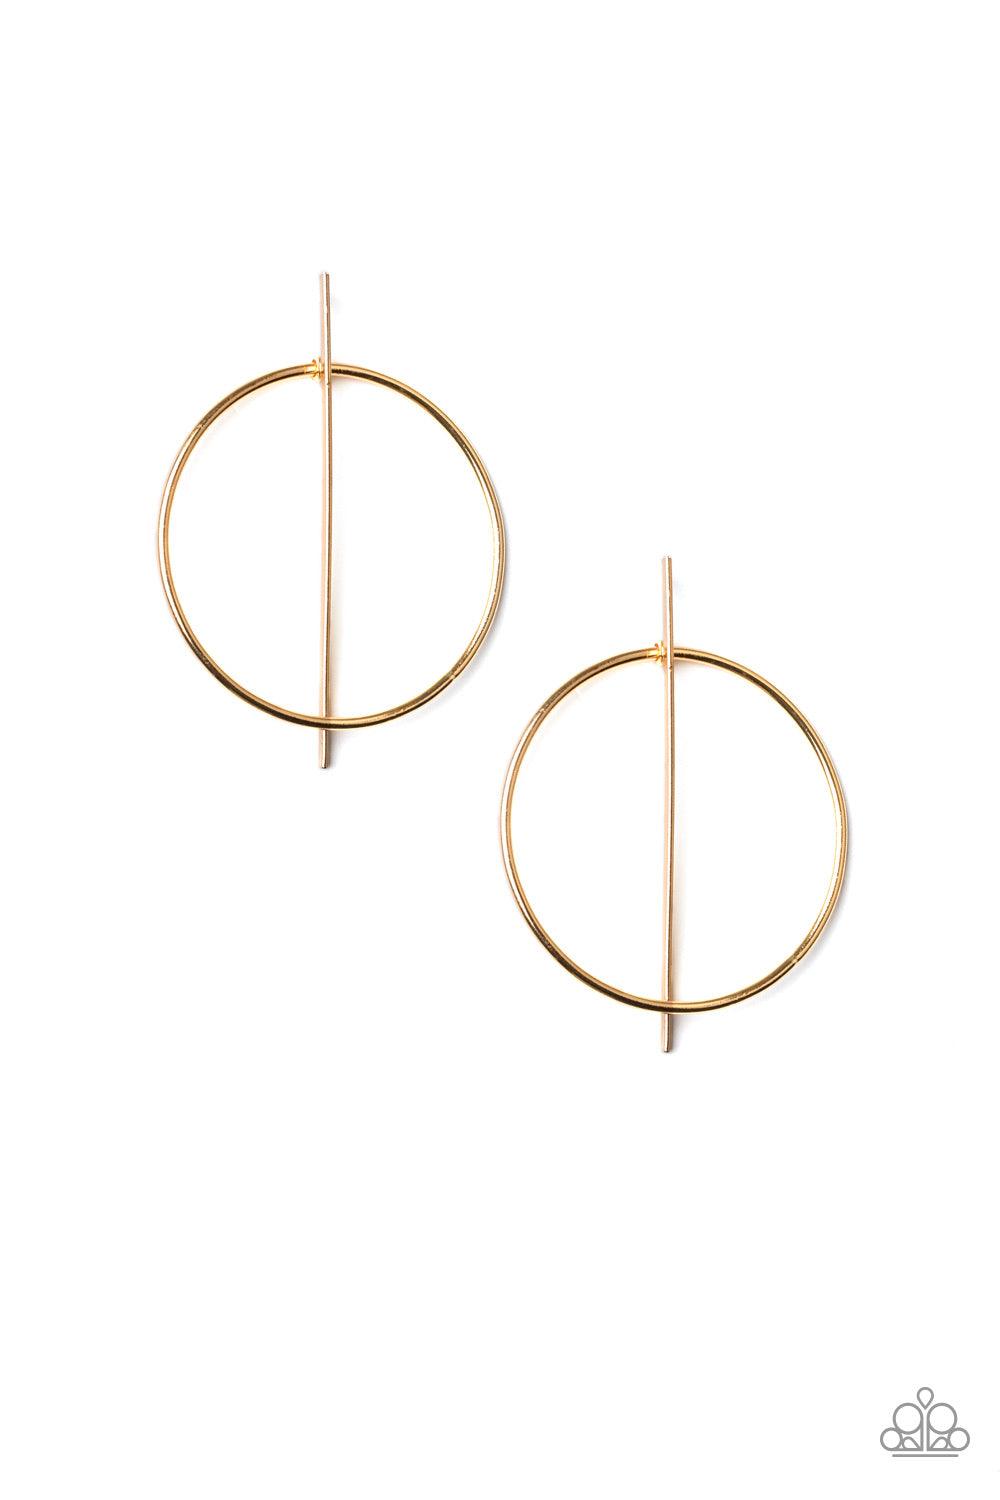 Paparazzi Accessories Vogue Visionary ~Gold A glistening gold hoop is threaded through a flat gold rod, creating an abstract frame. Earring attaches to a standard post fitting.